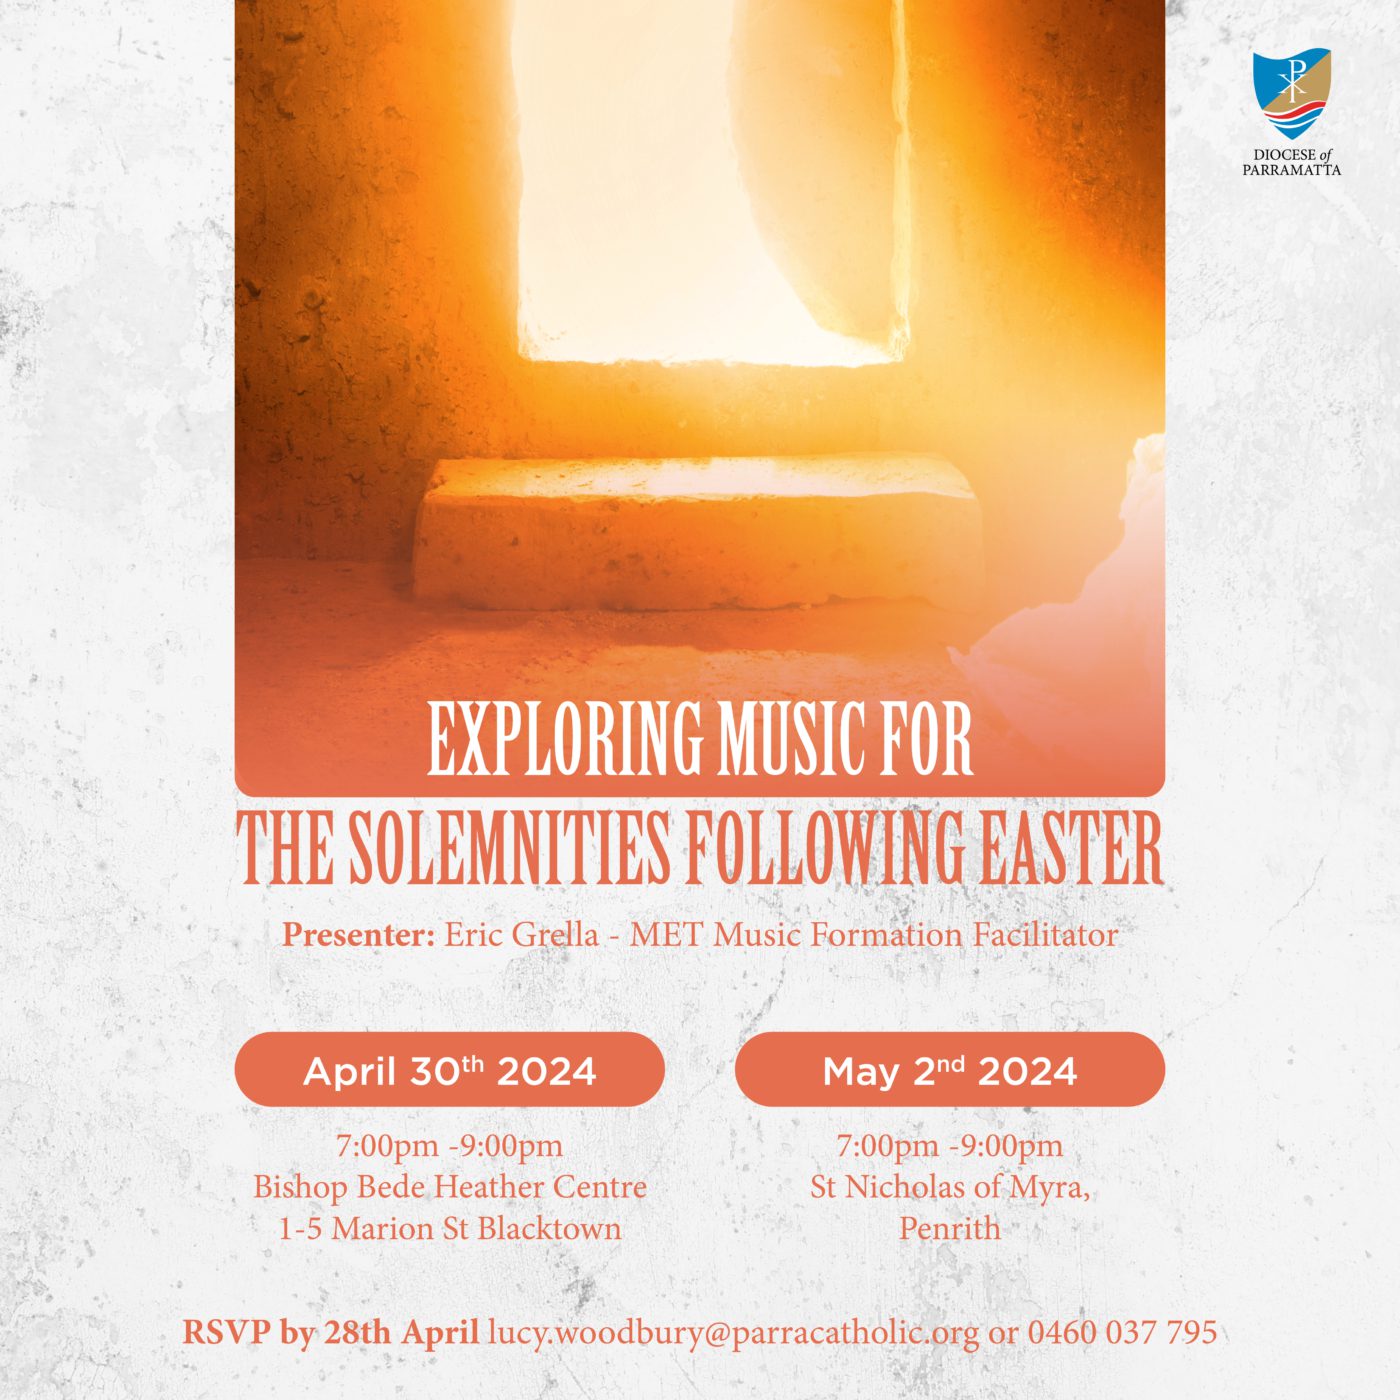 Exploring Music for the Solemnities following Easter (2 May)